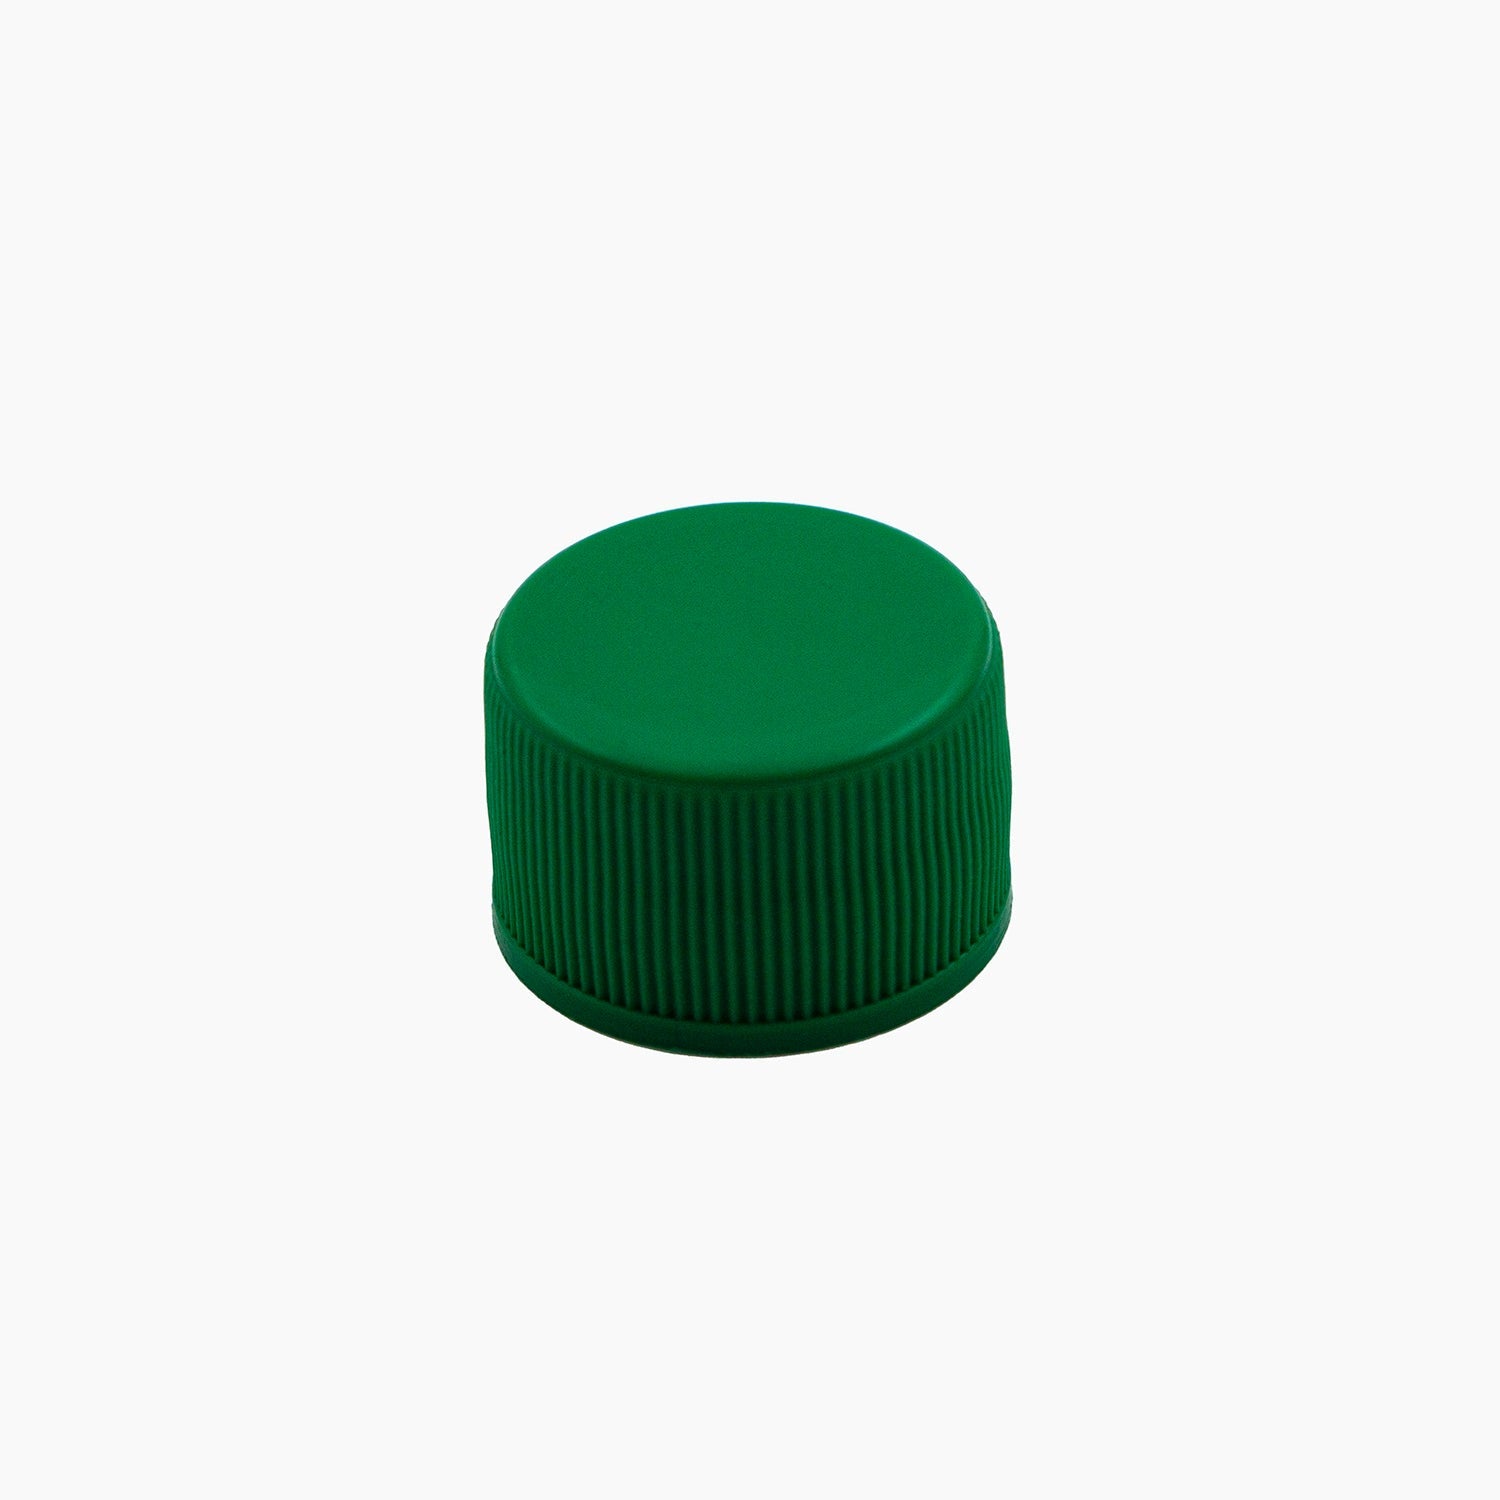 Green 24mm Plastic Standard EPE Liner Bottle Cap On White Background | Brightpack Closures And Accessories